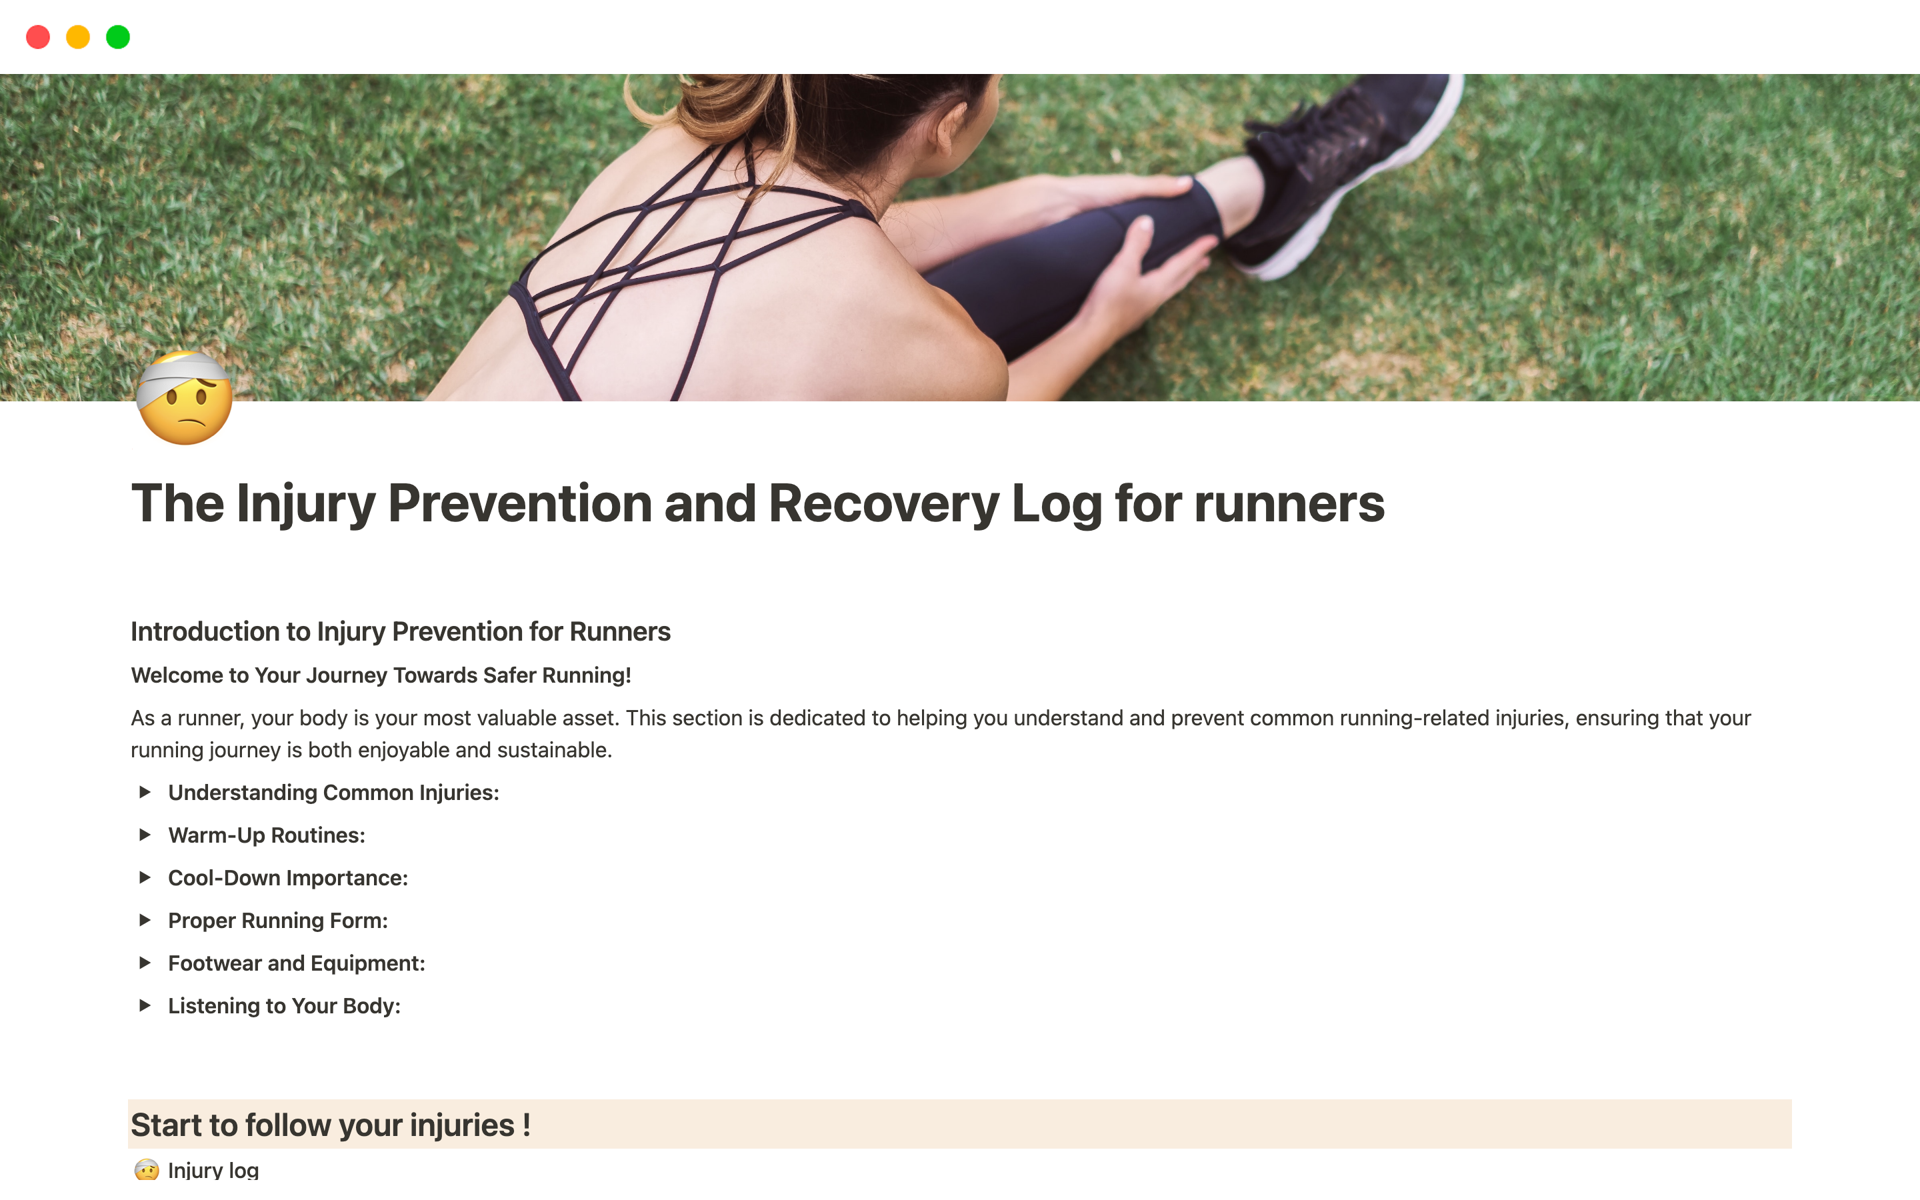 Aperçu du modèle de The Injury Prevention and Recovery Log for runners